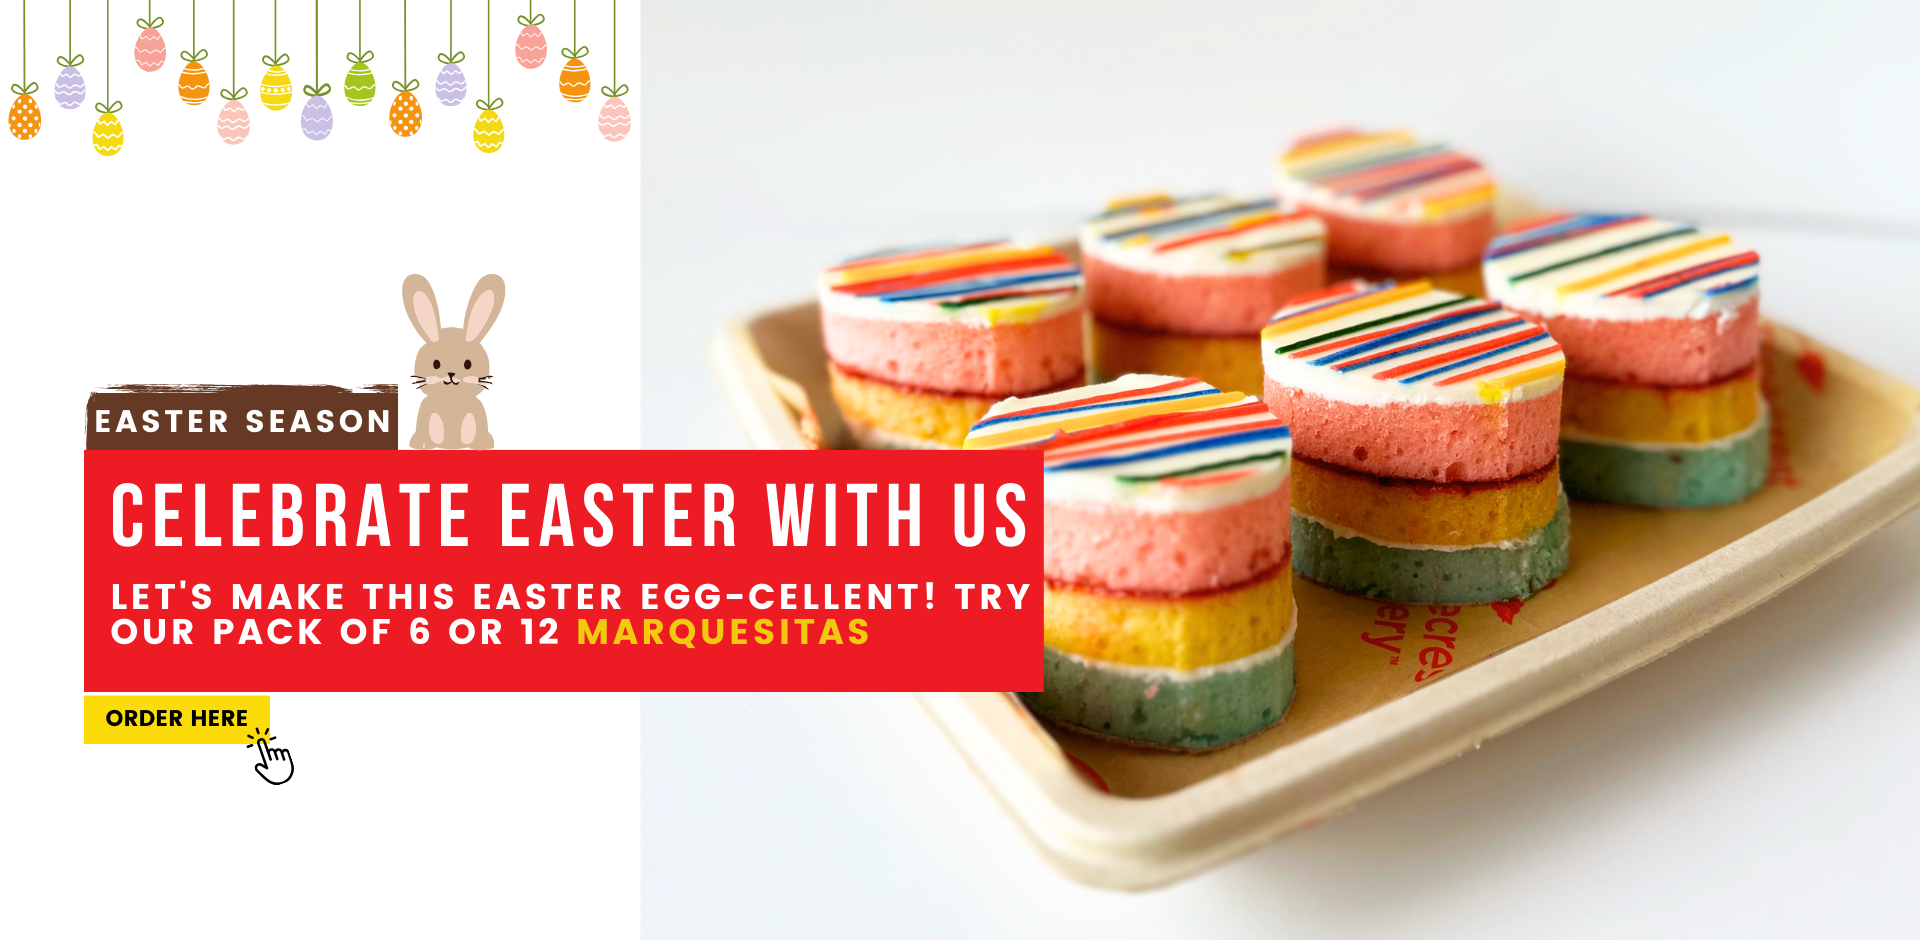 Easter season. Celebrate Easter with us. Let's make this Easter egg-cellent! Try our pack of 6 or 12 Marquesitas. ORDER HERE